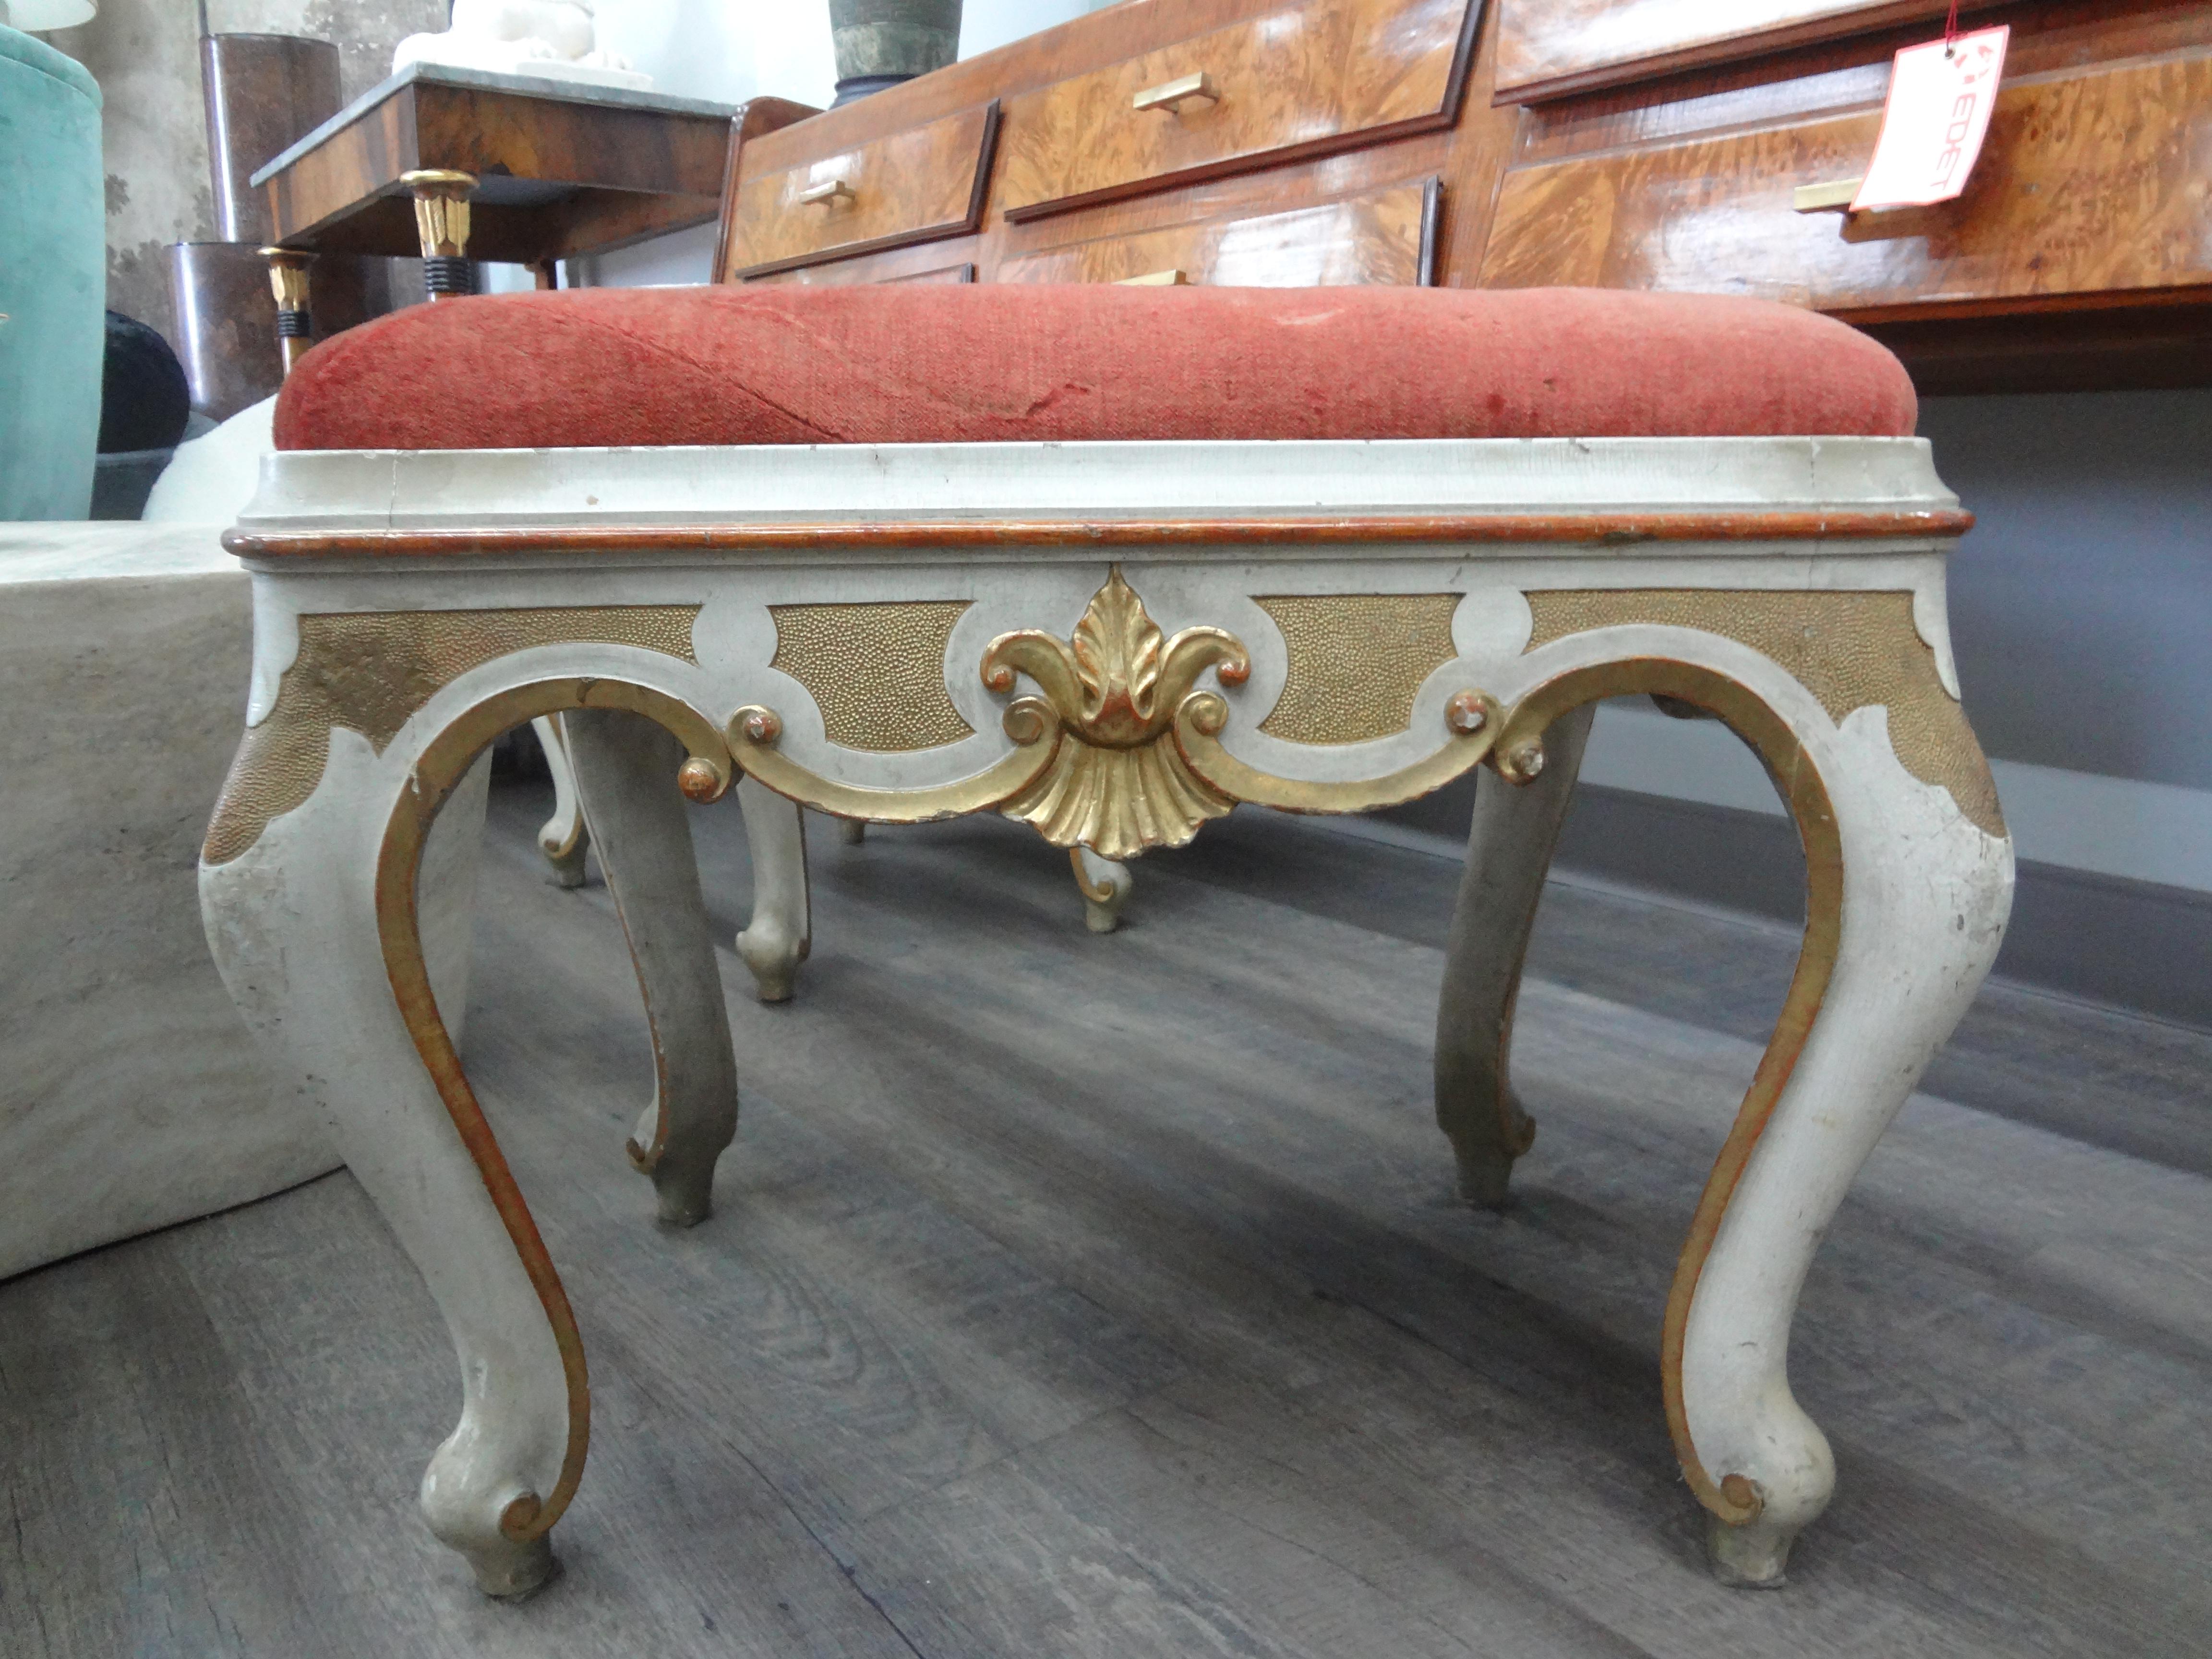 Pair of 19th Century Italian Painted and Parcel Gilt Ottomans.
This listing is for a large pair of antique Italian painted and giltwood ottomans or benches.
This versatile pair of benches, ottomans or stools would look great under a console table or